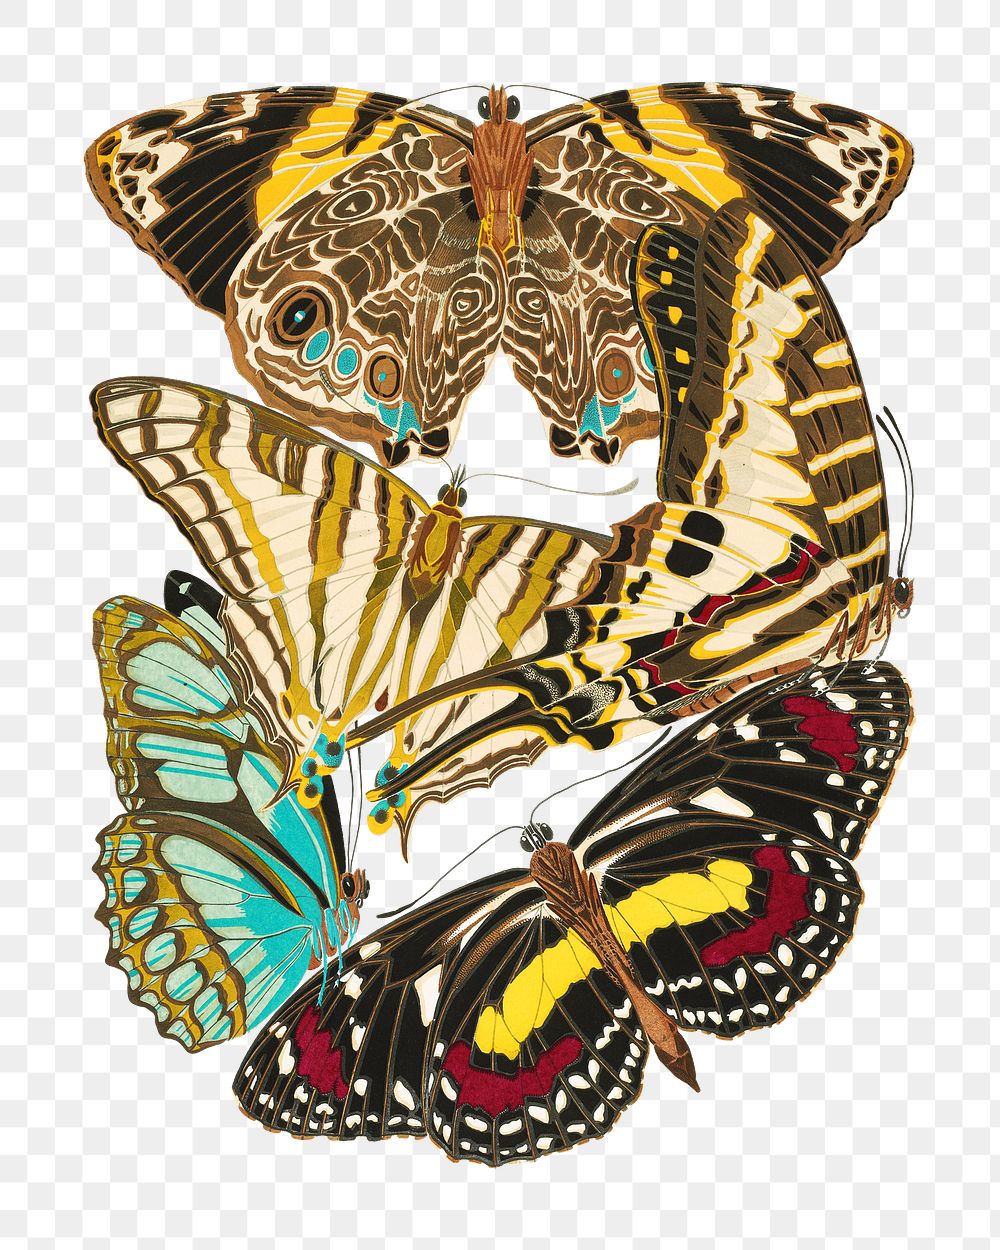 E.A. S&eacute;guy's png butterfly sticker, vintage insect set on transparent background.  Remixed by rawpixel